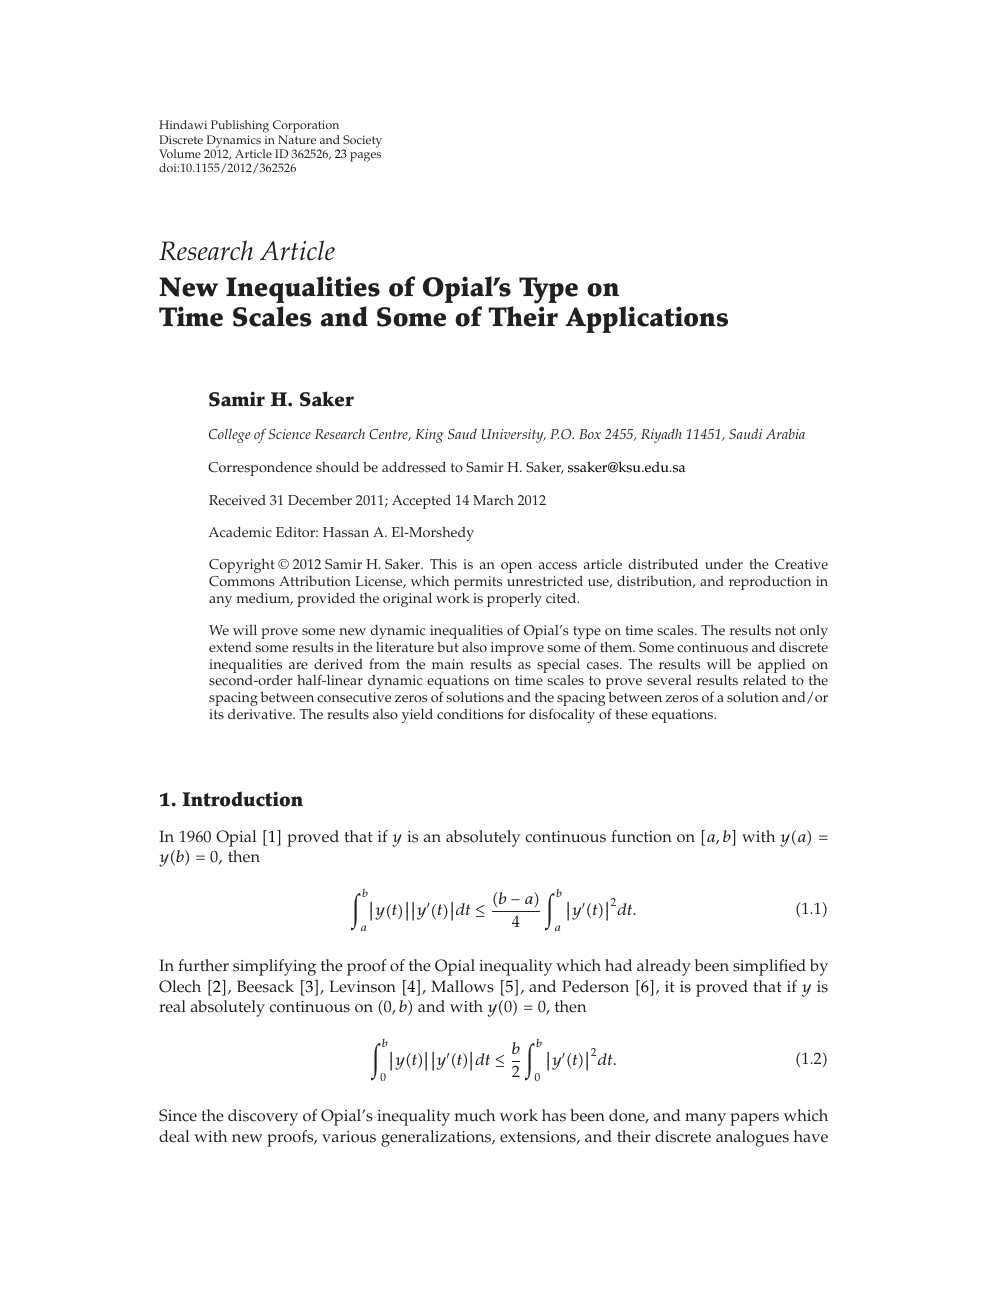 New Inequalities Of Opial S Type On Time Scales And Some Of Their Applications Topic Of Research Paper In Mathematics Download Scholarly Article Pdf And Read For Free On Cyberleninka Open Science